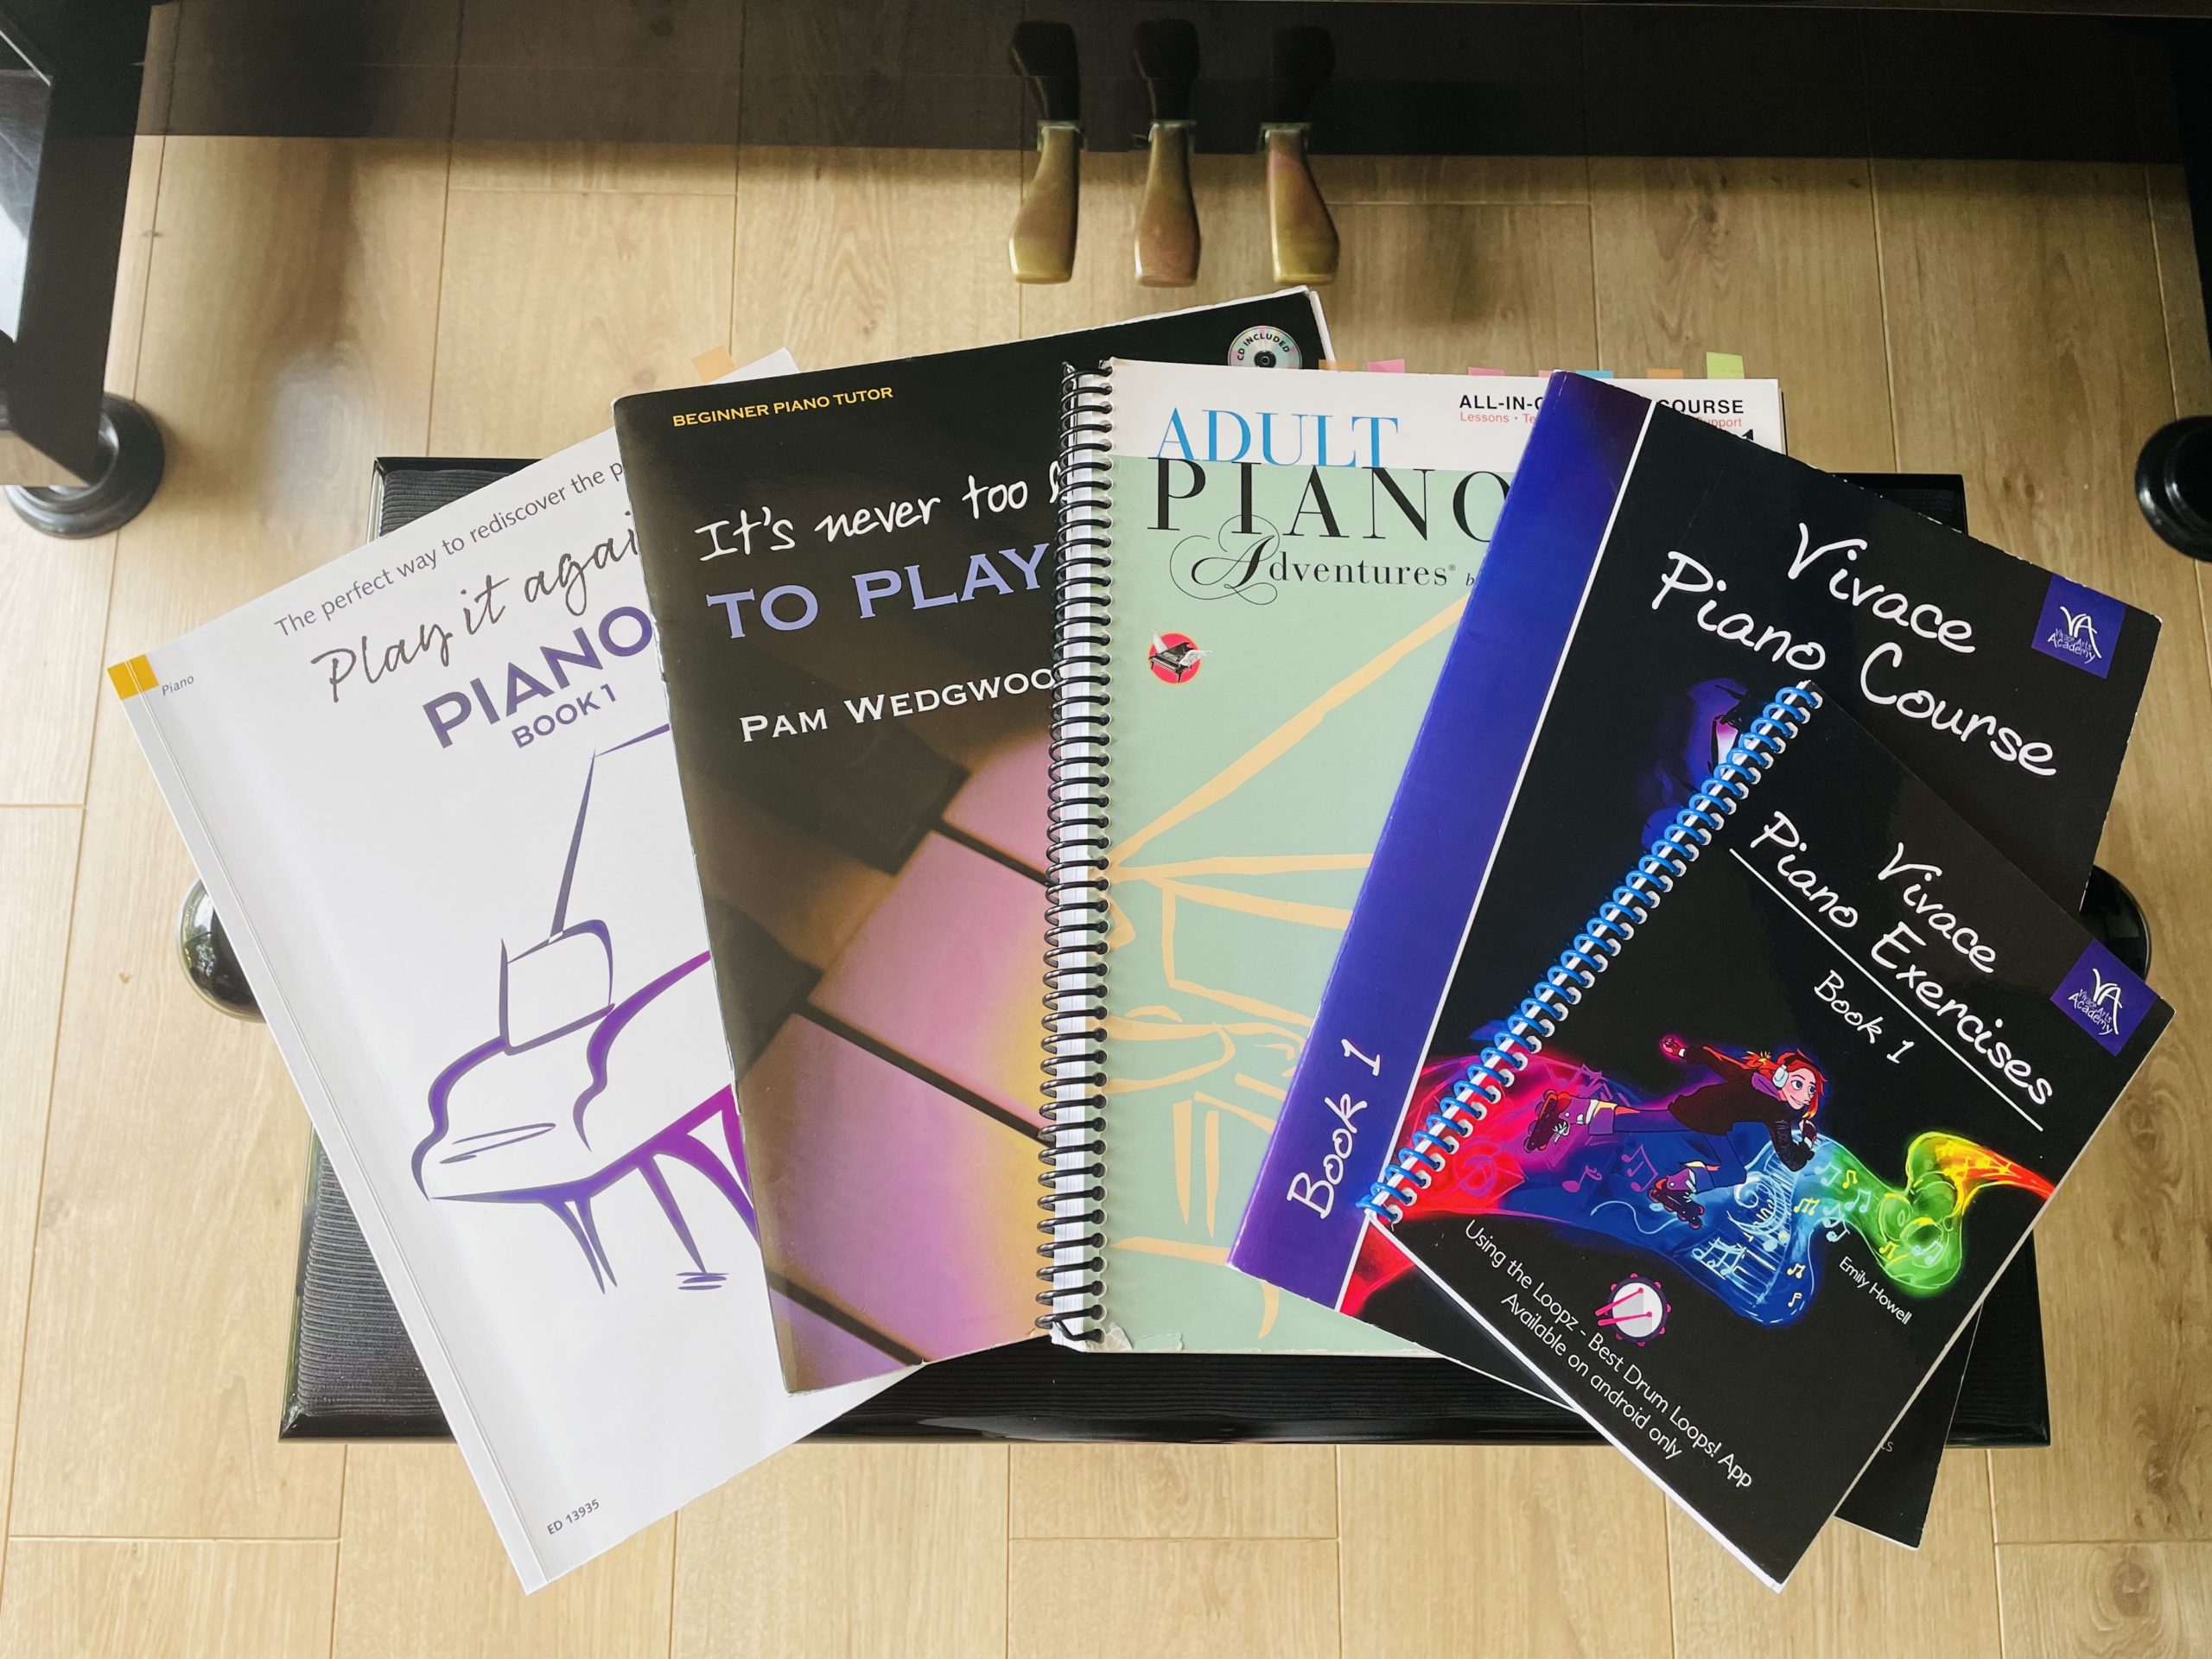 Best Piano books for Adults